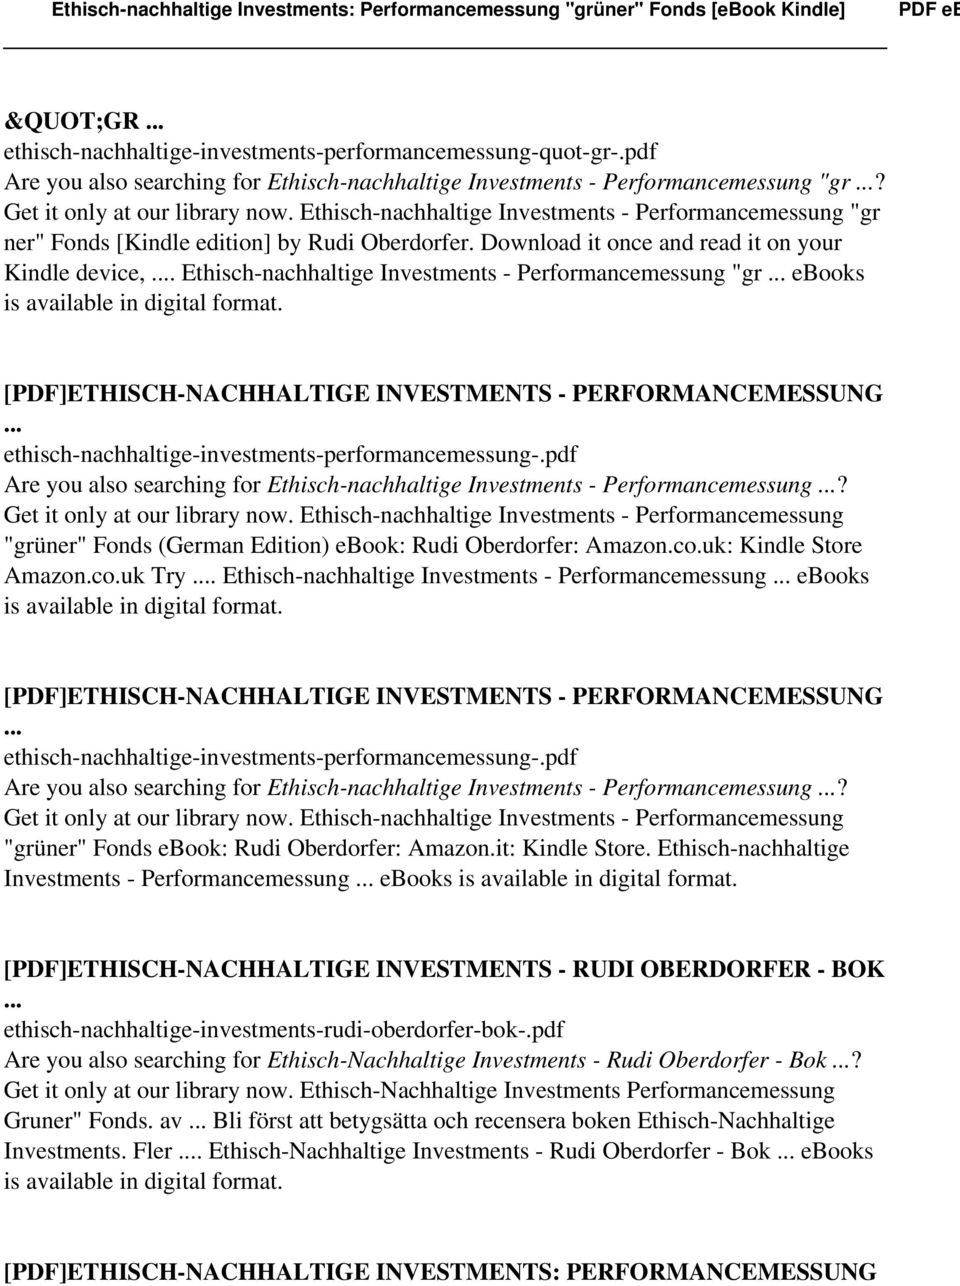 Ethisch-nachhaltige Investments - Performancemessung "gr ebooks is available in digital Are you also searching for Ethisch-nachhaltige Investments - Performancemessung? Get it only at our library now.